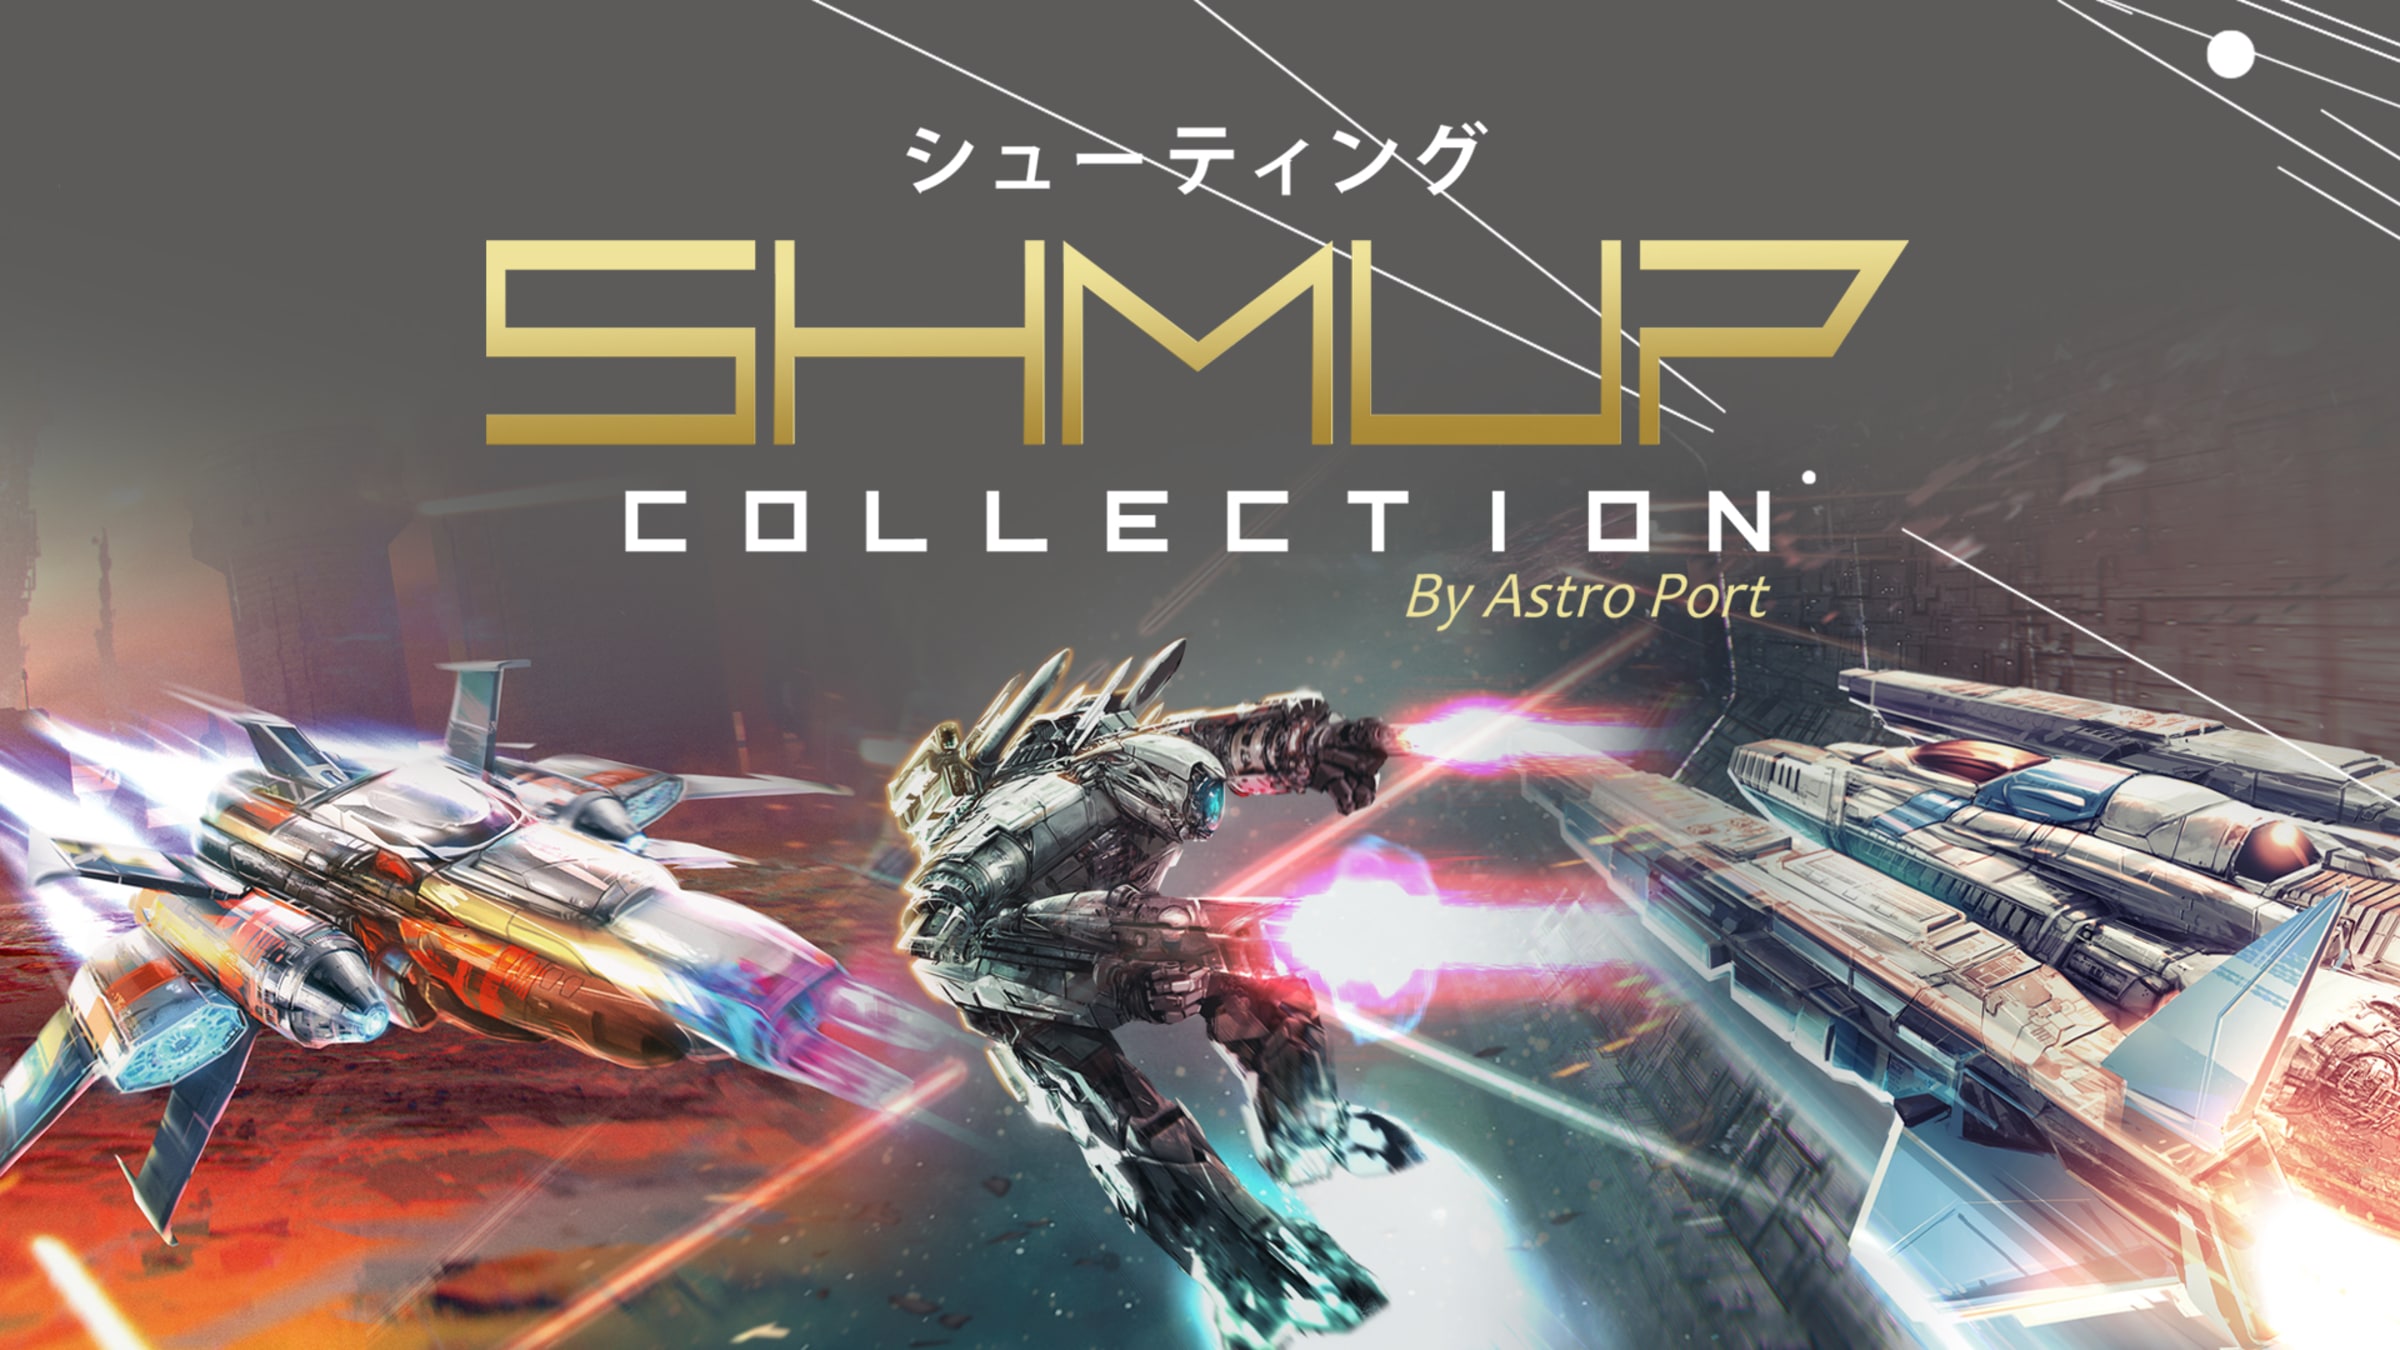 Shmup Collection for Nintendo Switch